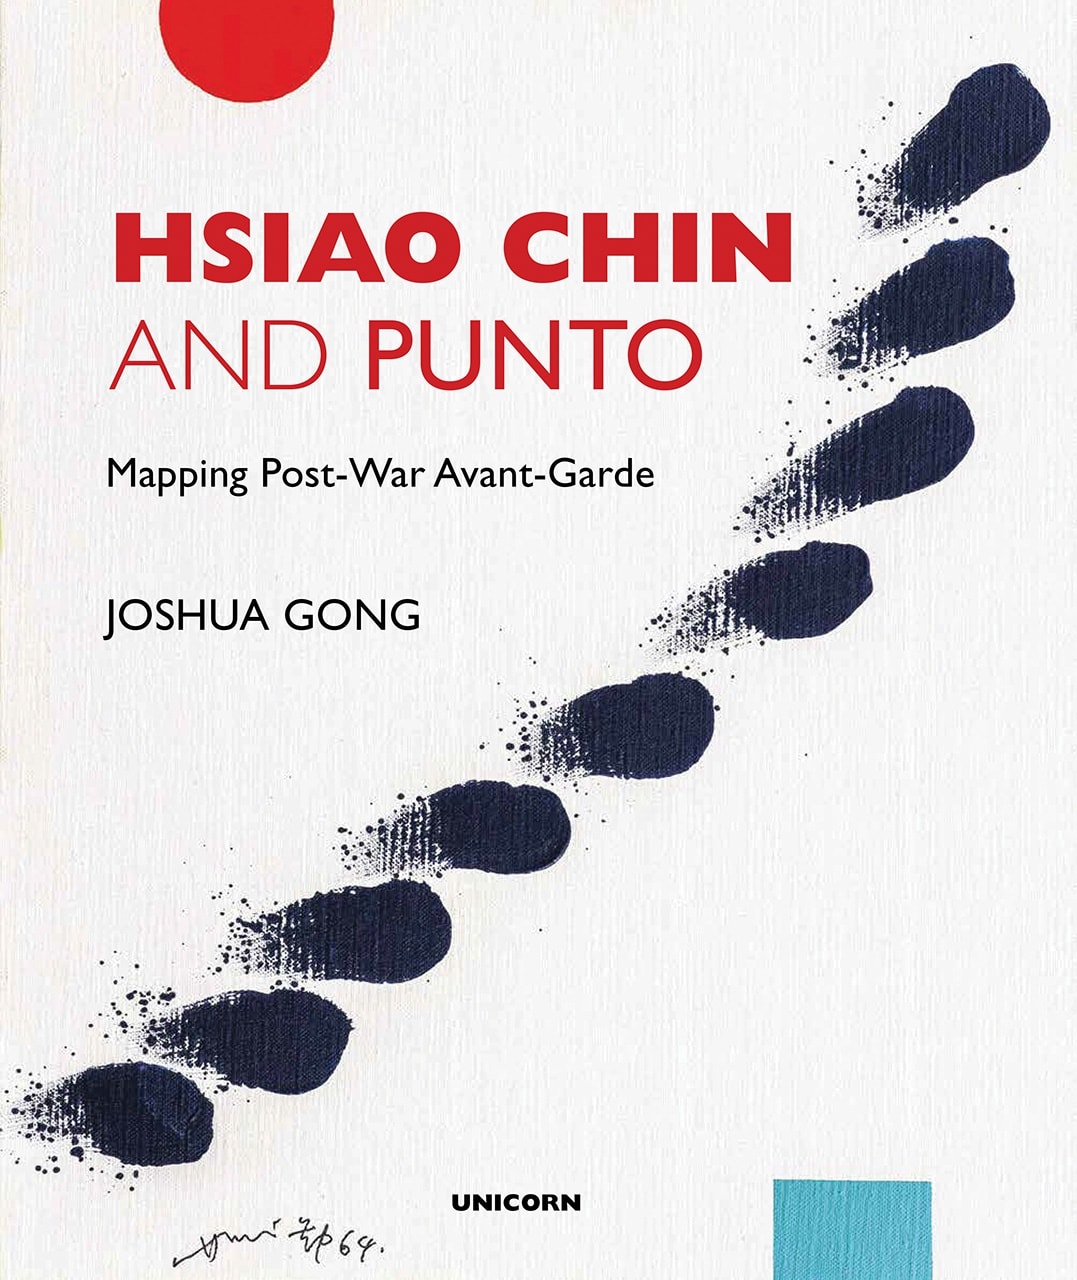 Hsiao Chin and Punto, Mapping Post-War Avant-Garde